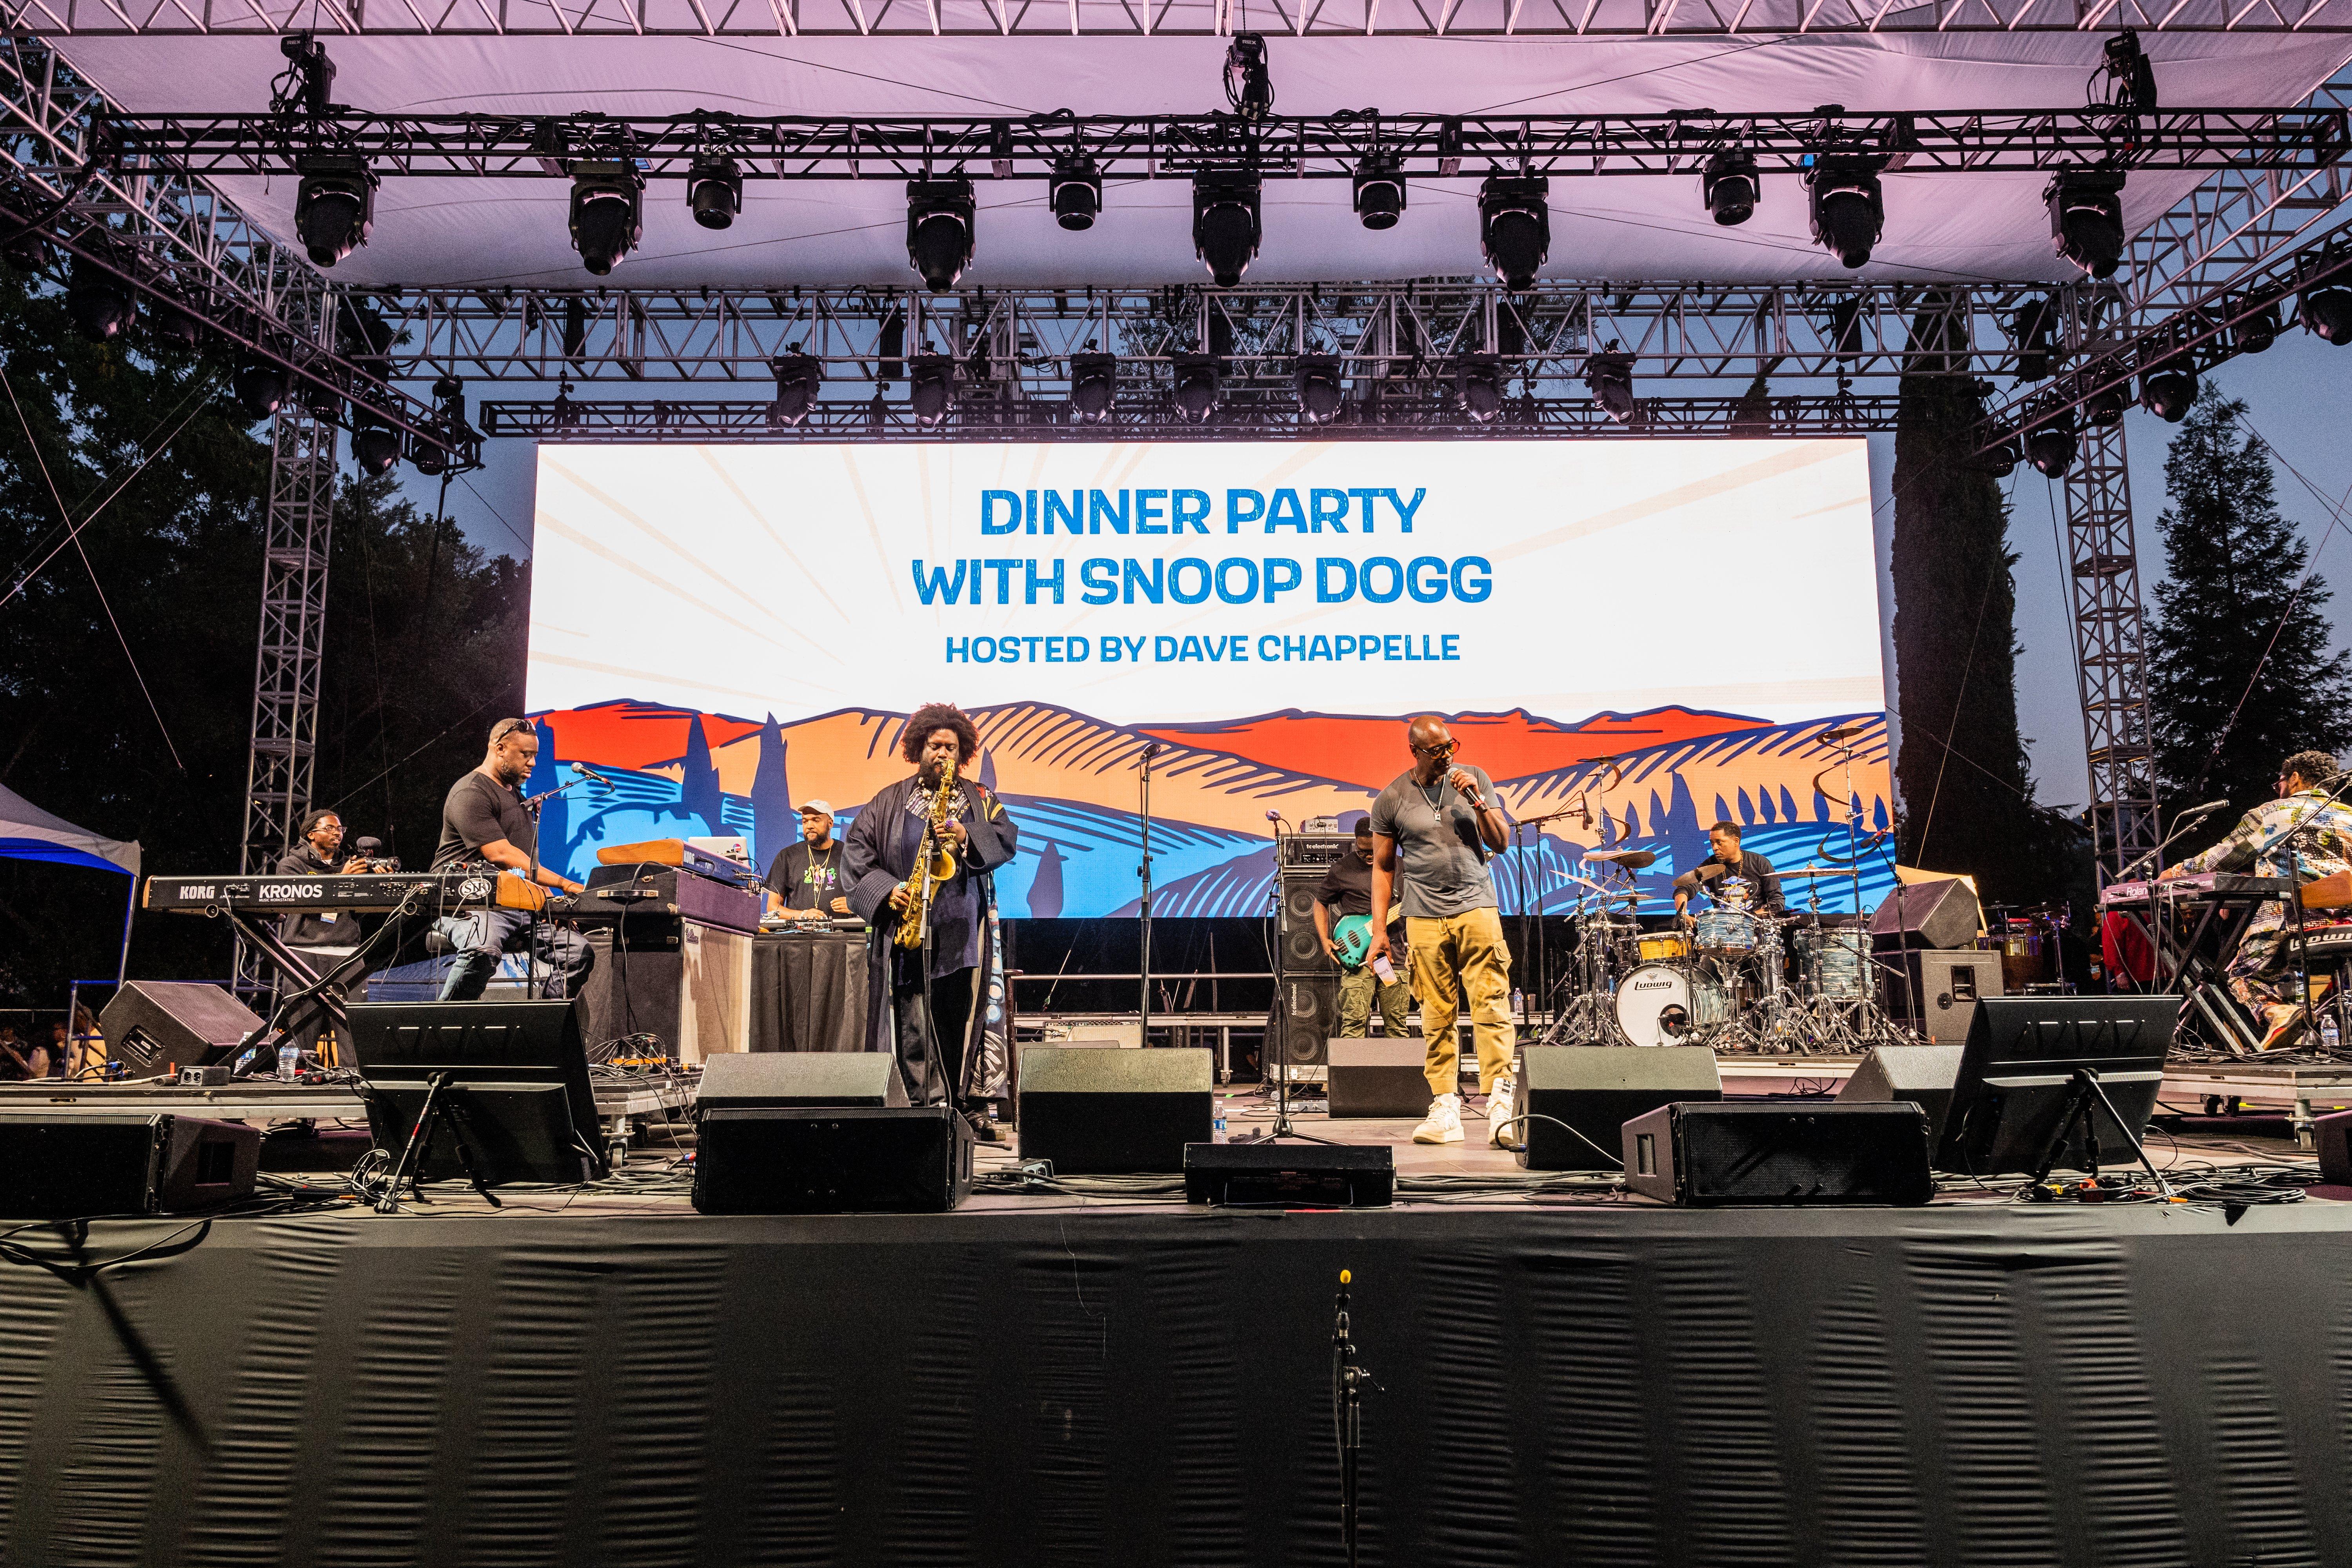 Dinner Party, a jazz/hip-hop hybrid supergroup, perform at the Blue Note Jazz Festival